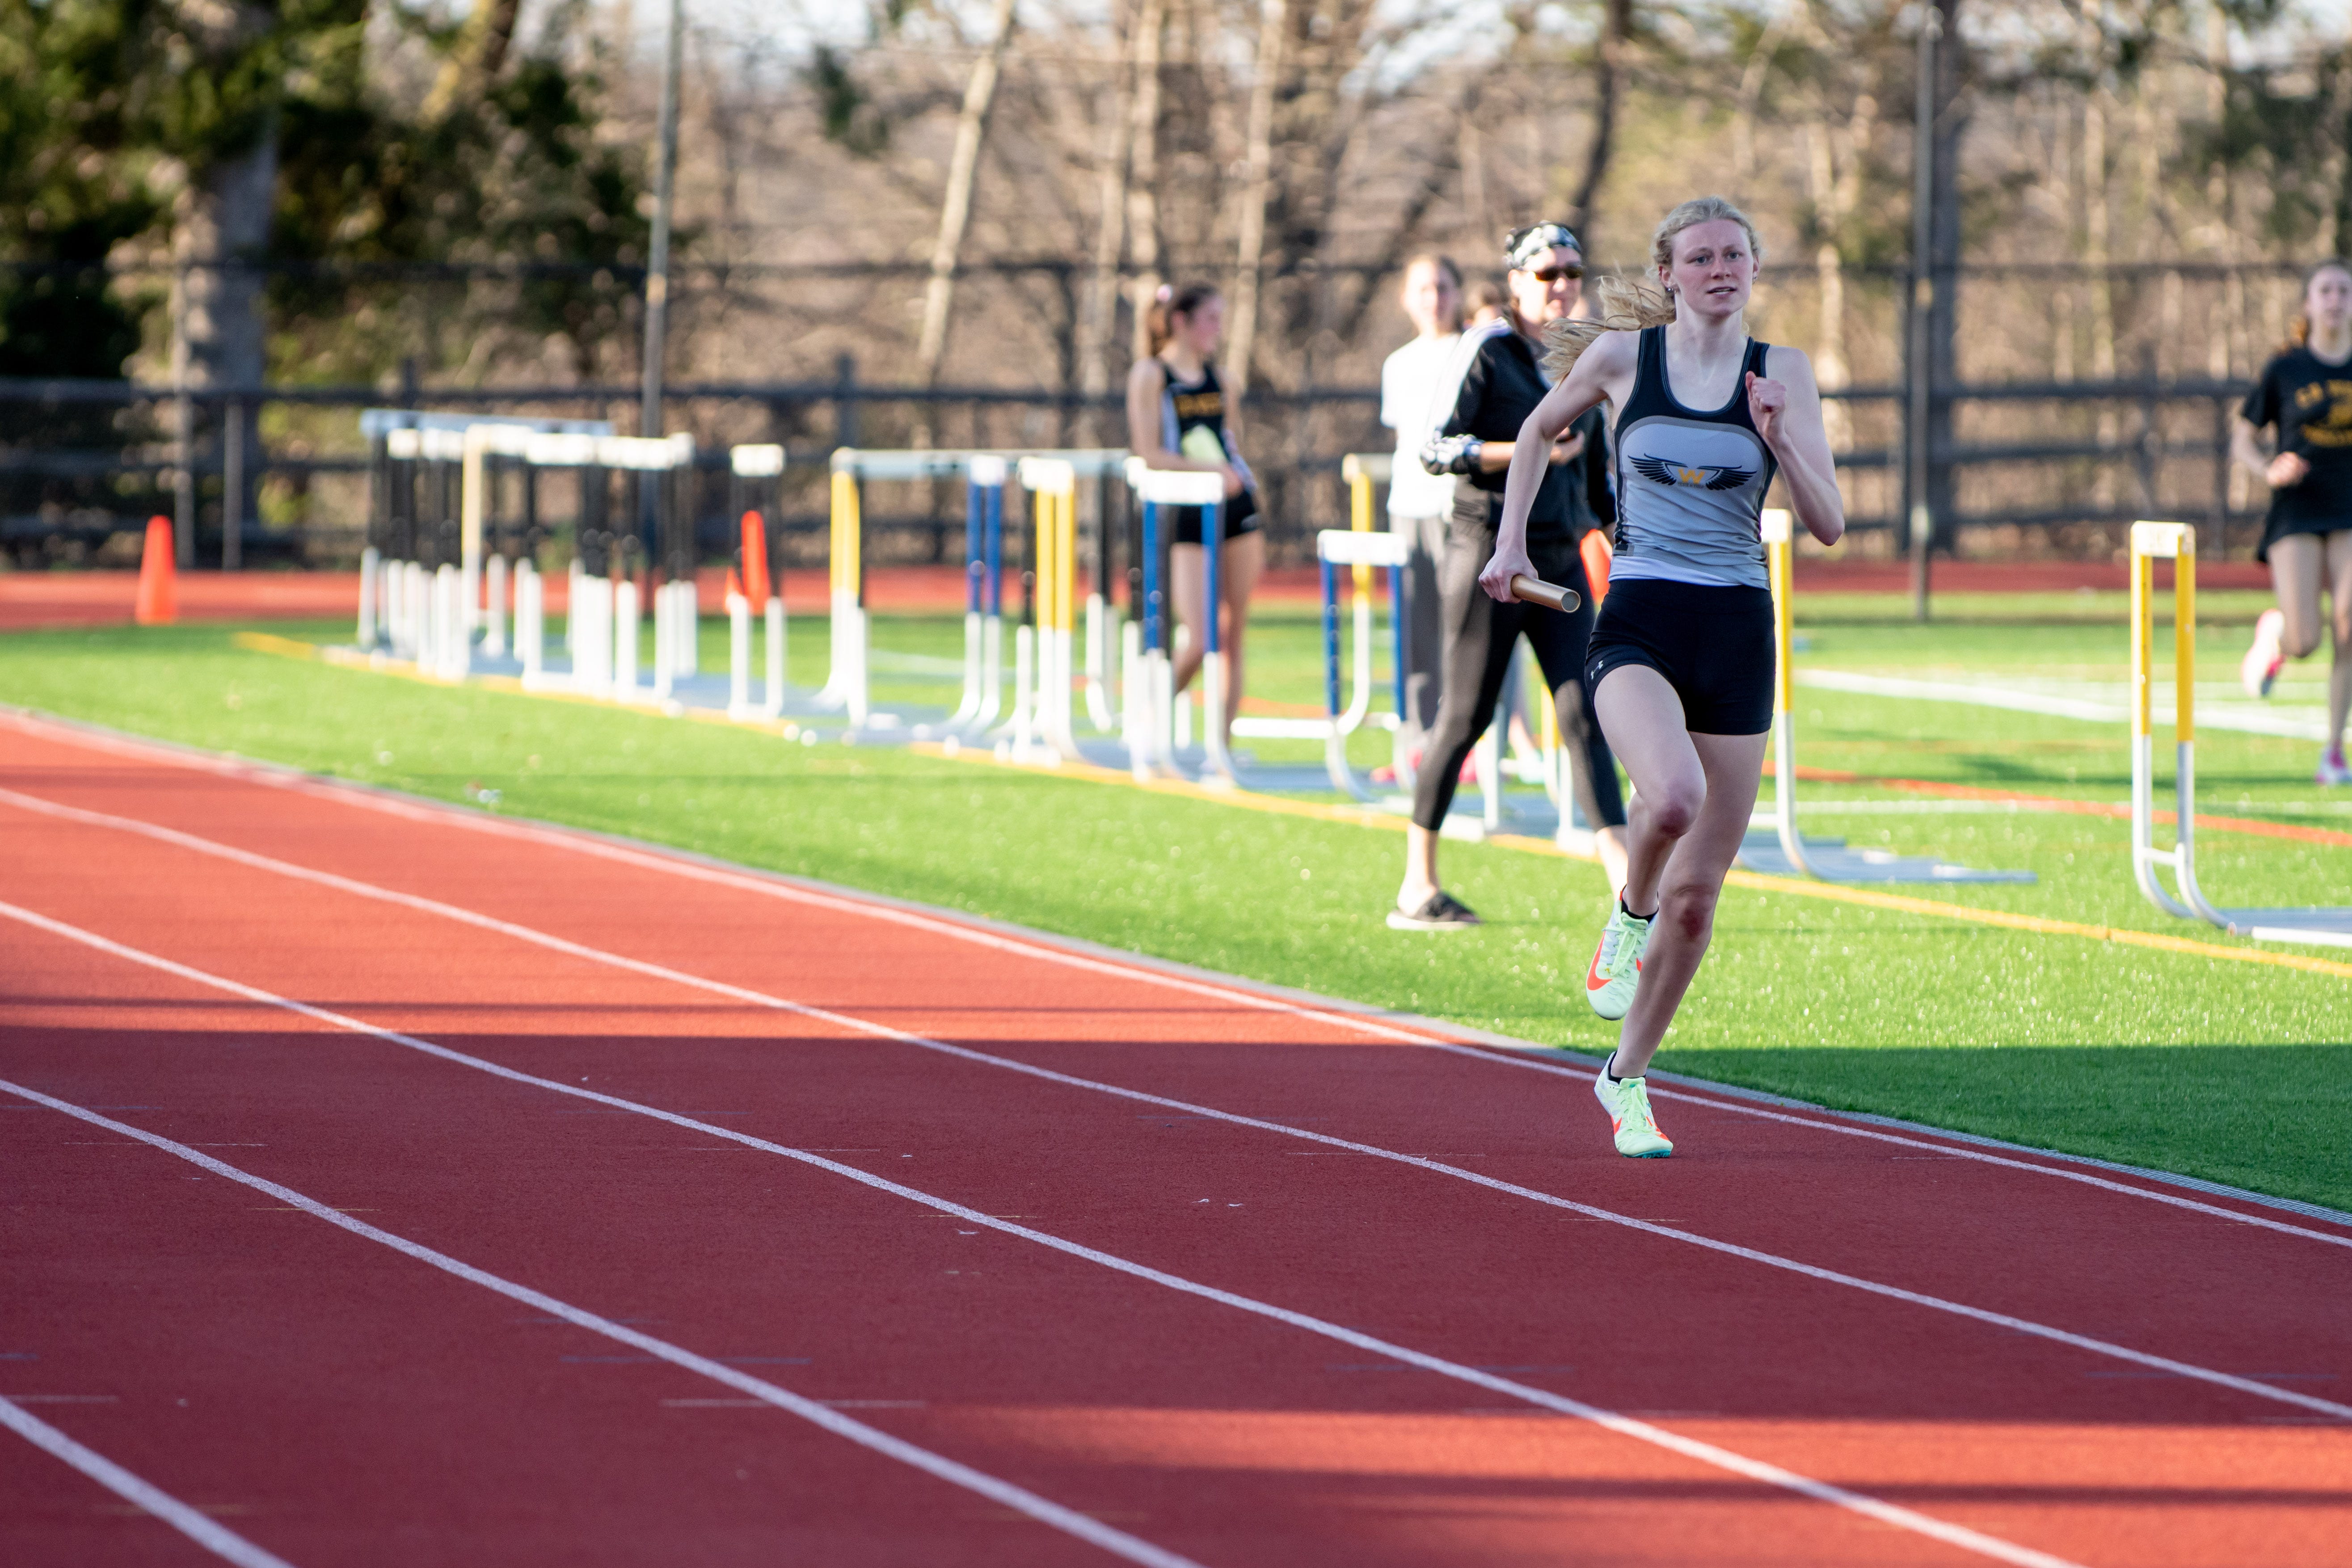 Central Bucks West's Kate Edensen runs the 4x400 relay during a meet against Central Bucks South, on Tuesday, April 12, 2022, at Central Bucks West.